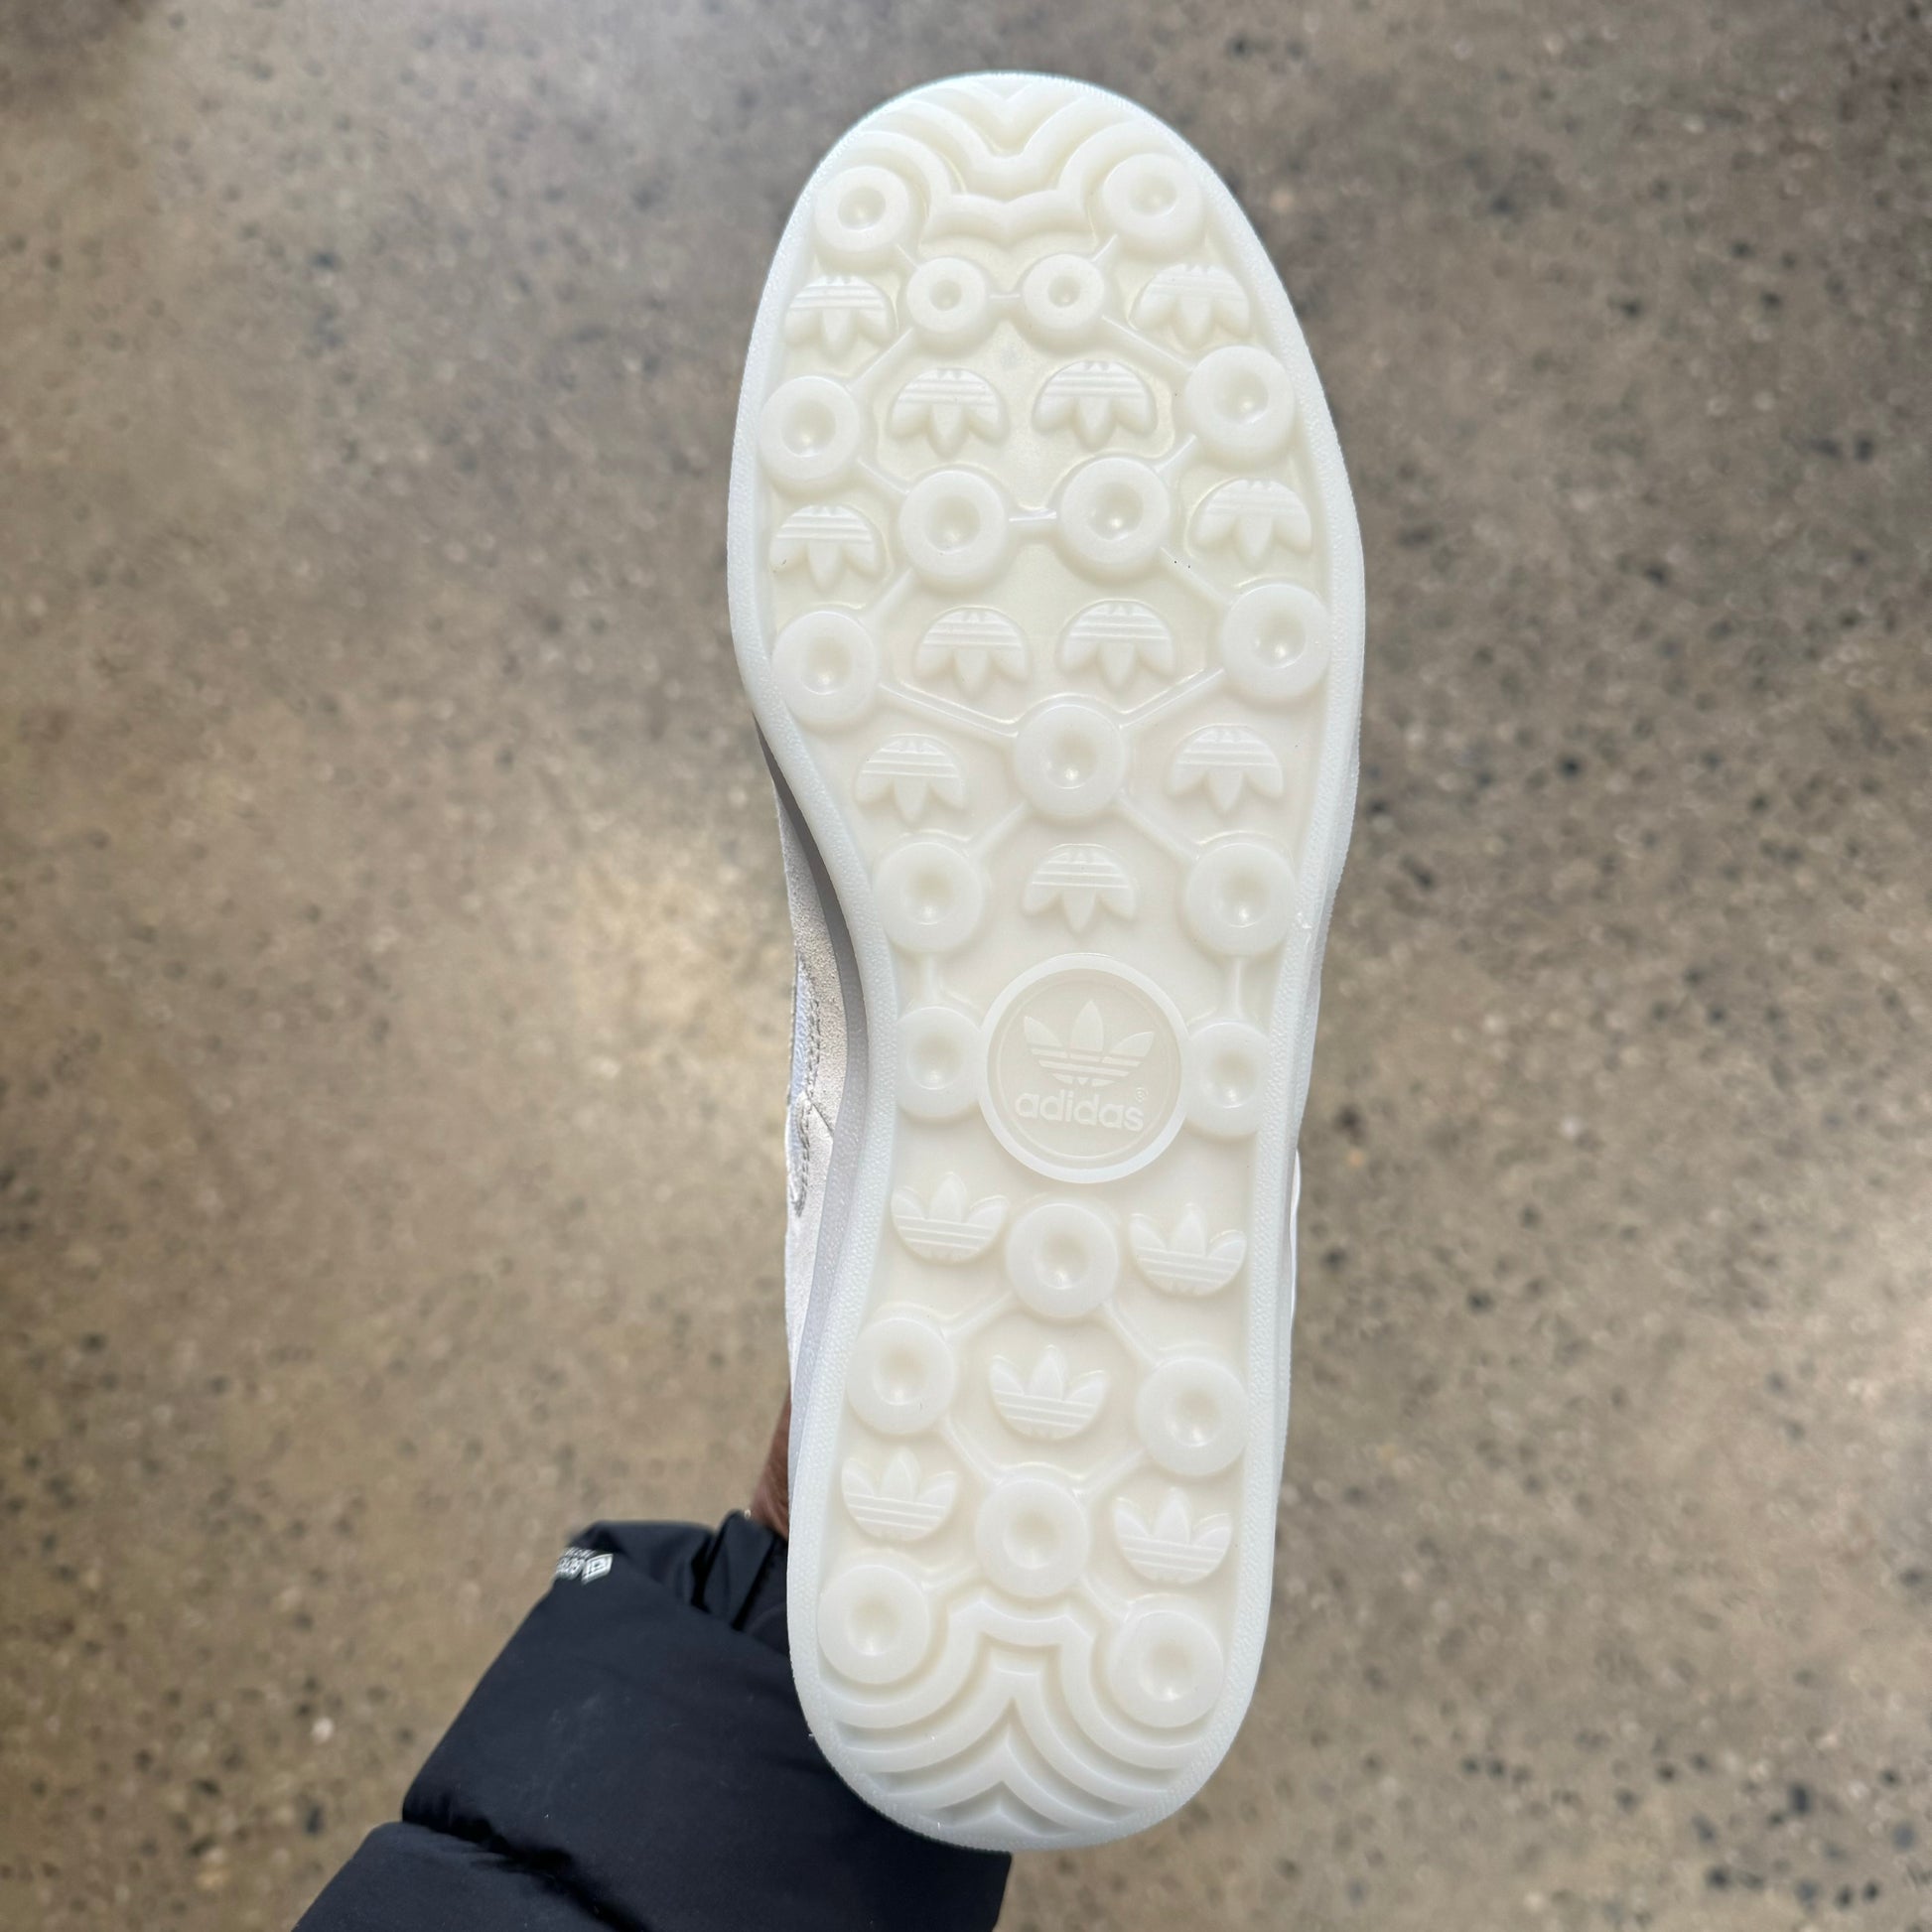 View of Sole on Adidas Aloha Super Crystal White